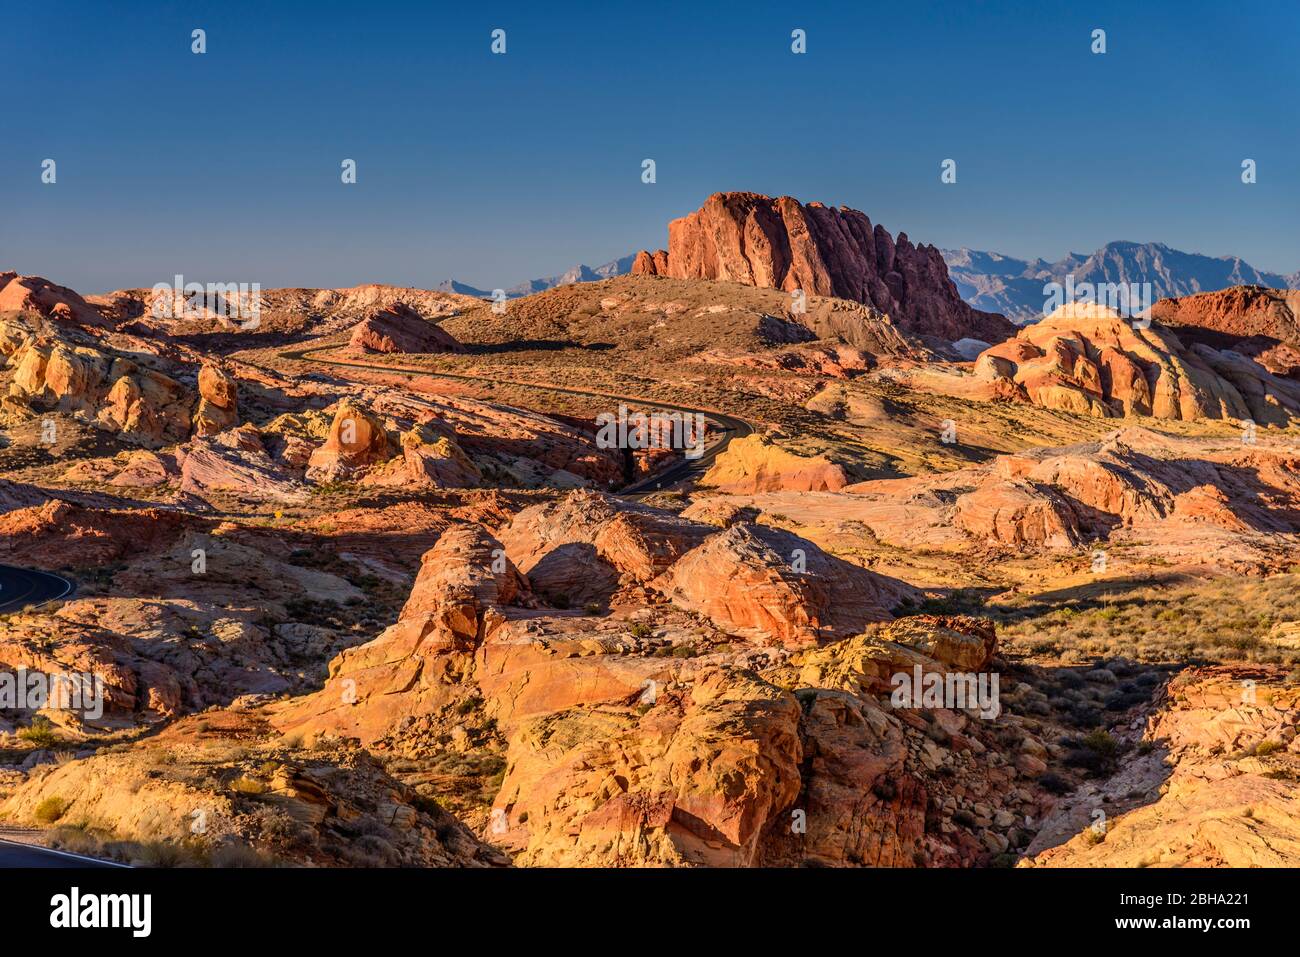 USA, Nevada, Clark County, Overton, Valley of Fire State Park, White Domes Scenic Byway mit Gibraltar Rock Stock Photo